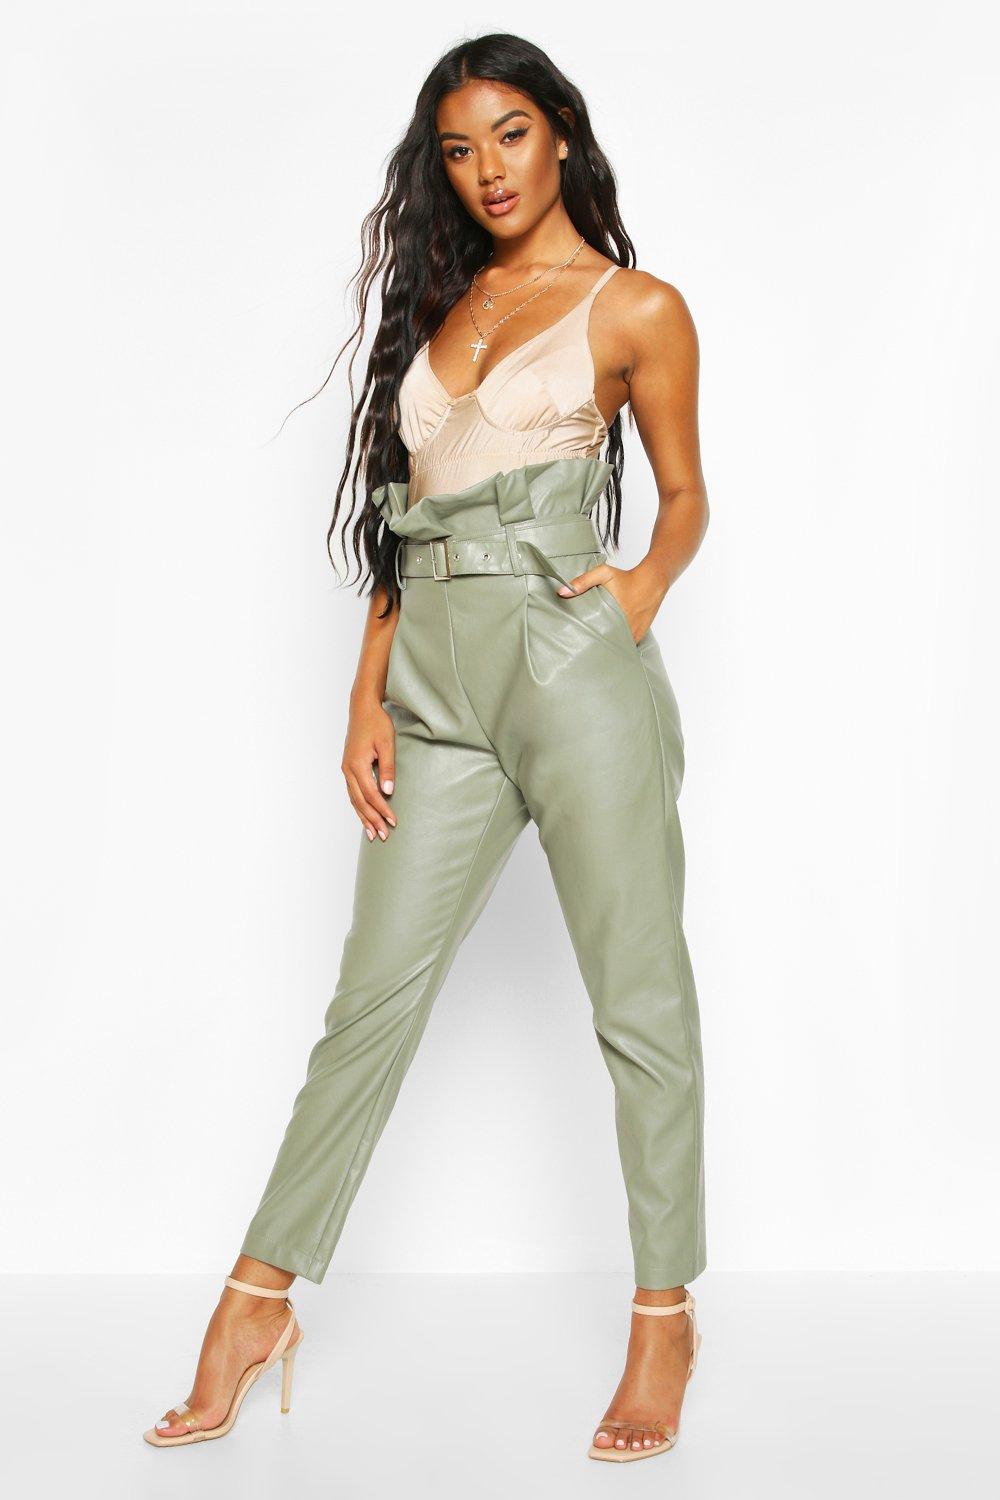 green leather look trousers